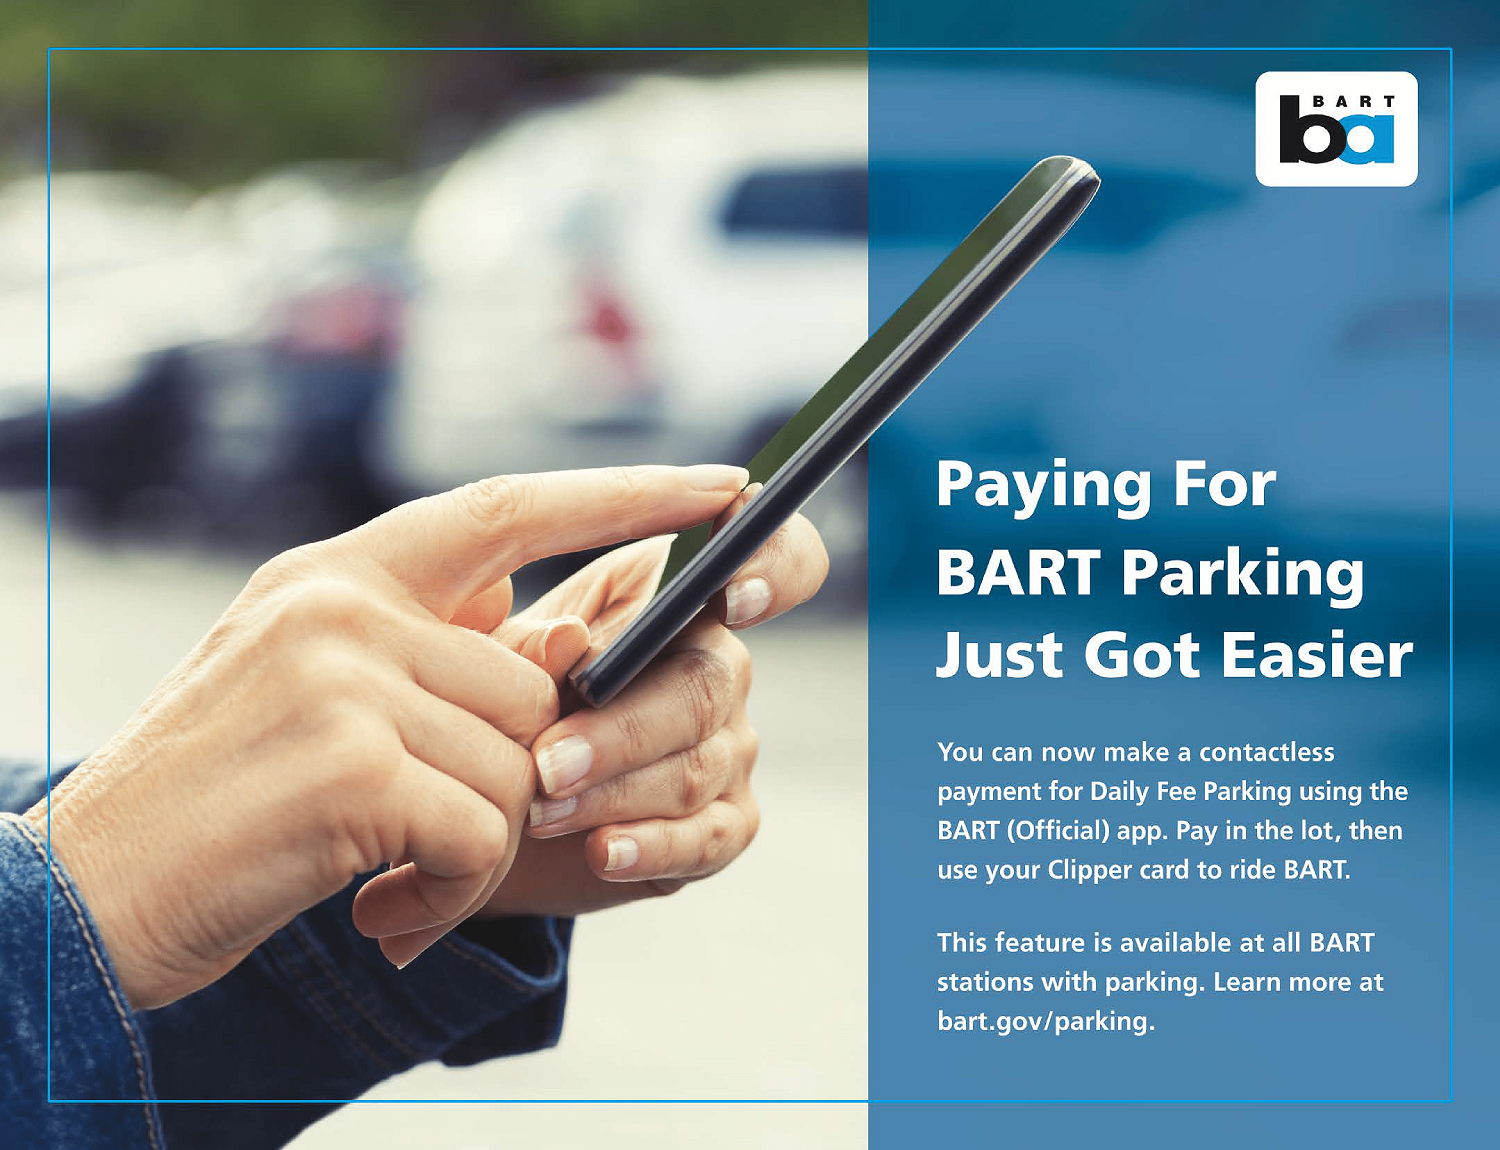 Contactless parking payment by app feature expands to all stations